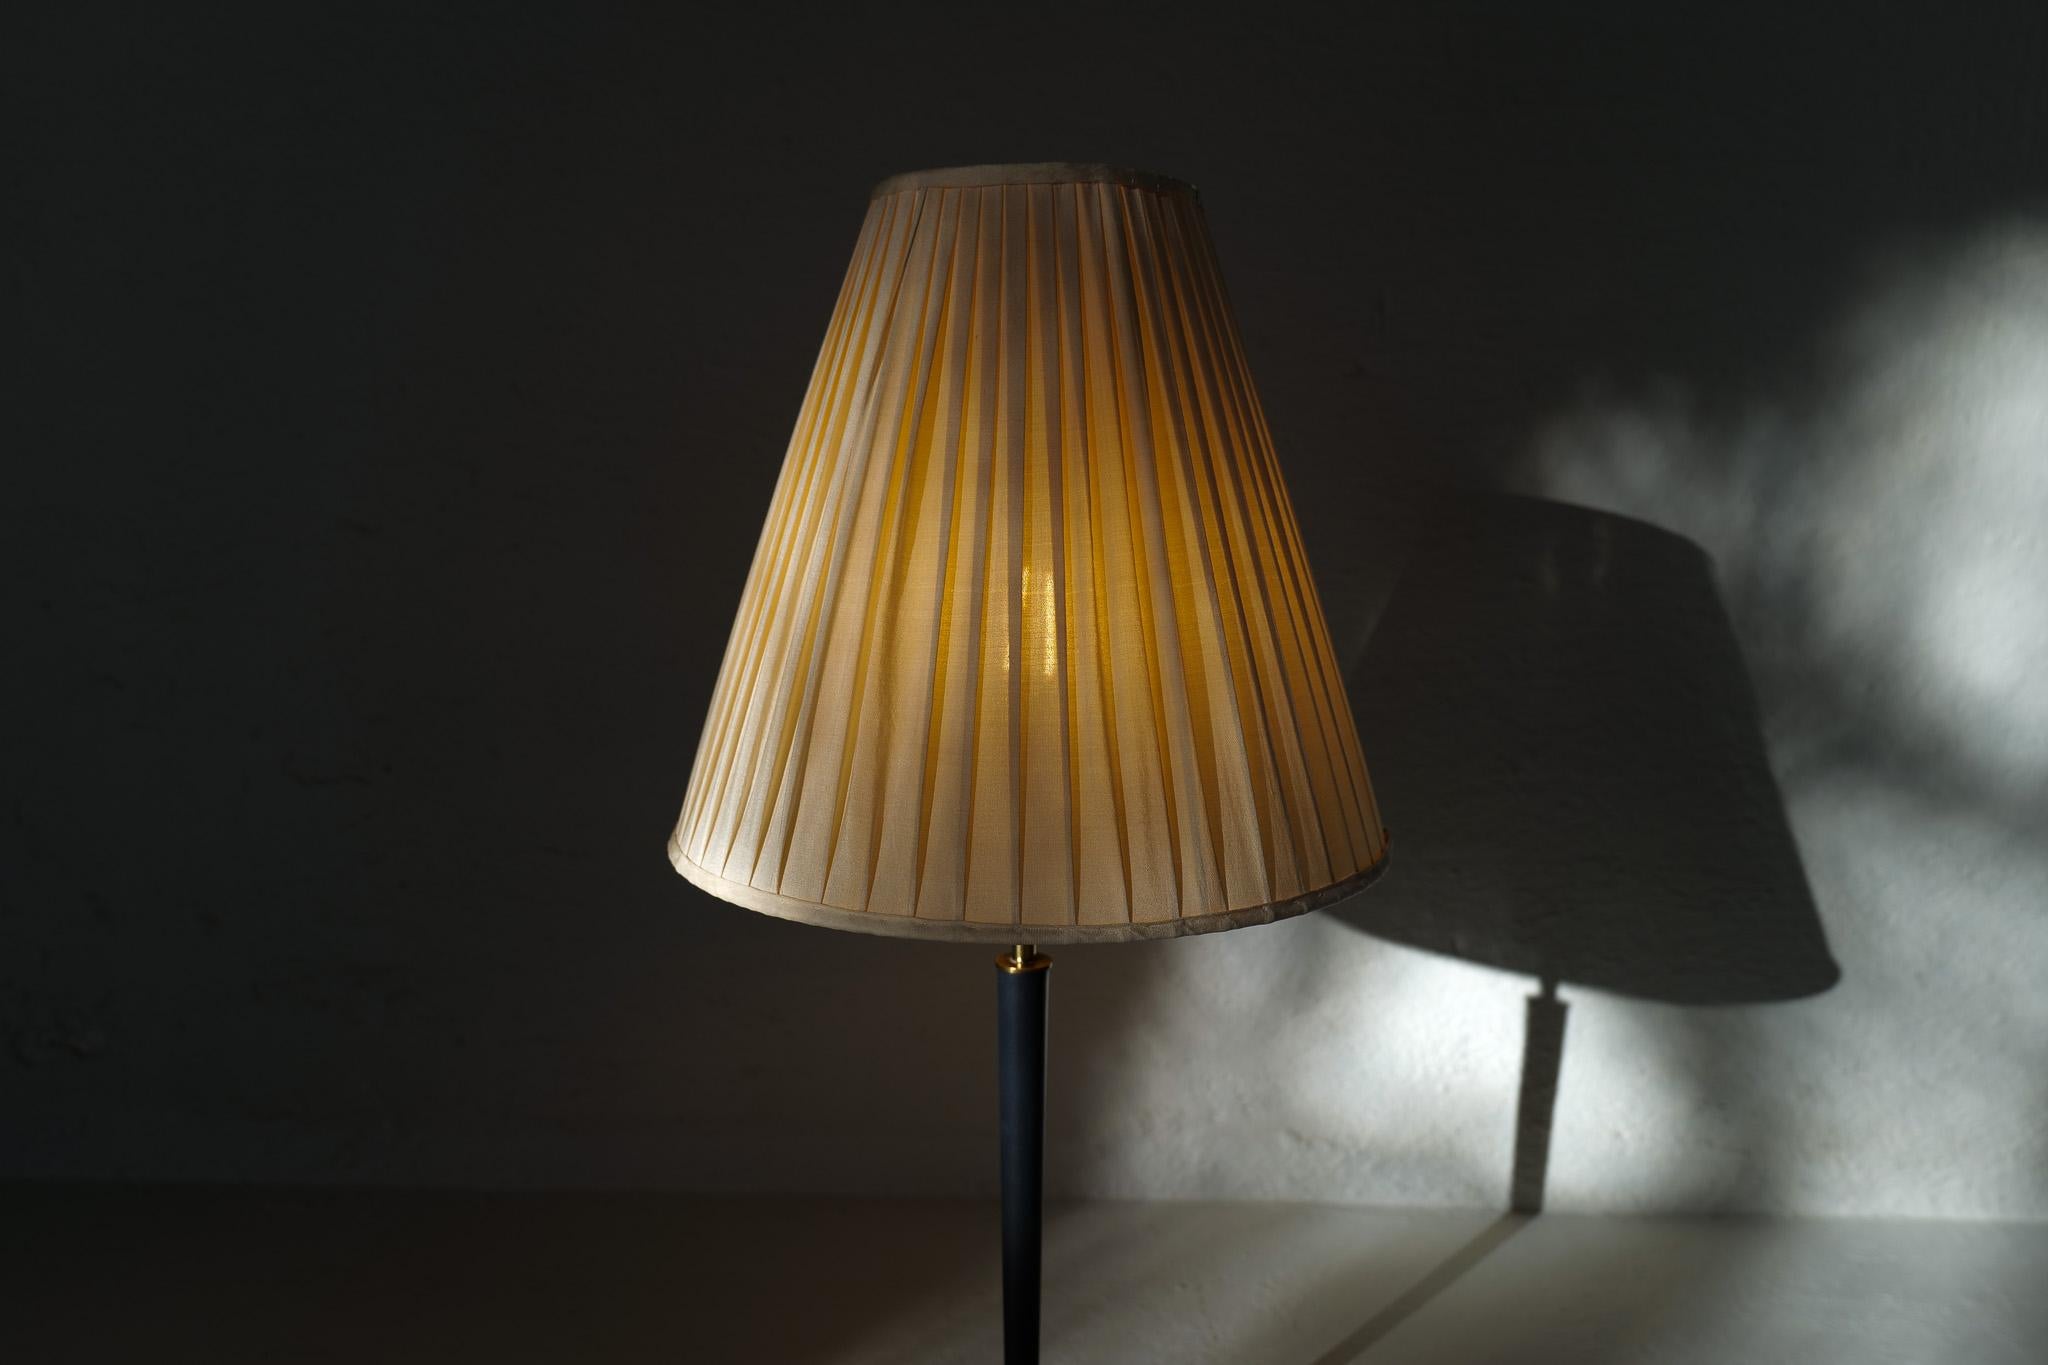 Mid-20th Century Midcentury Modern Table Lamp in Brass and Cast Iron Asea Sweden, 1950s For Sale